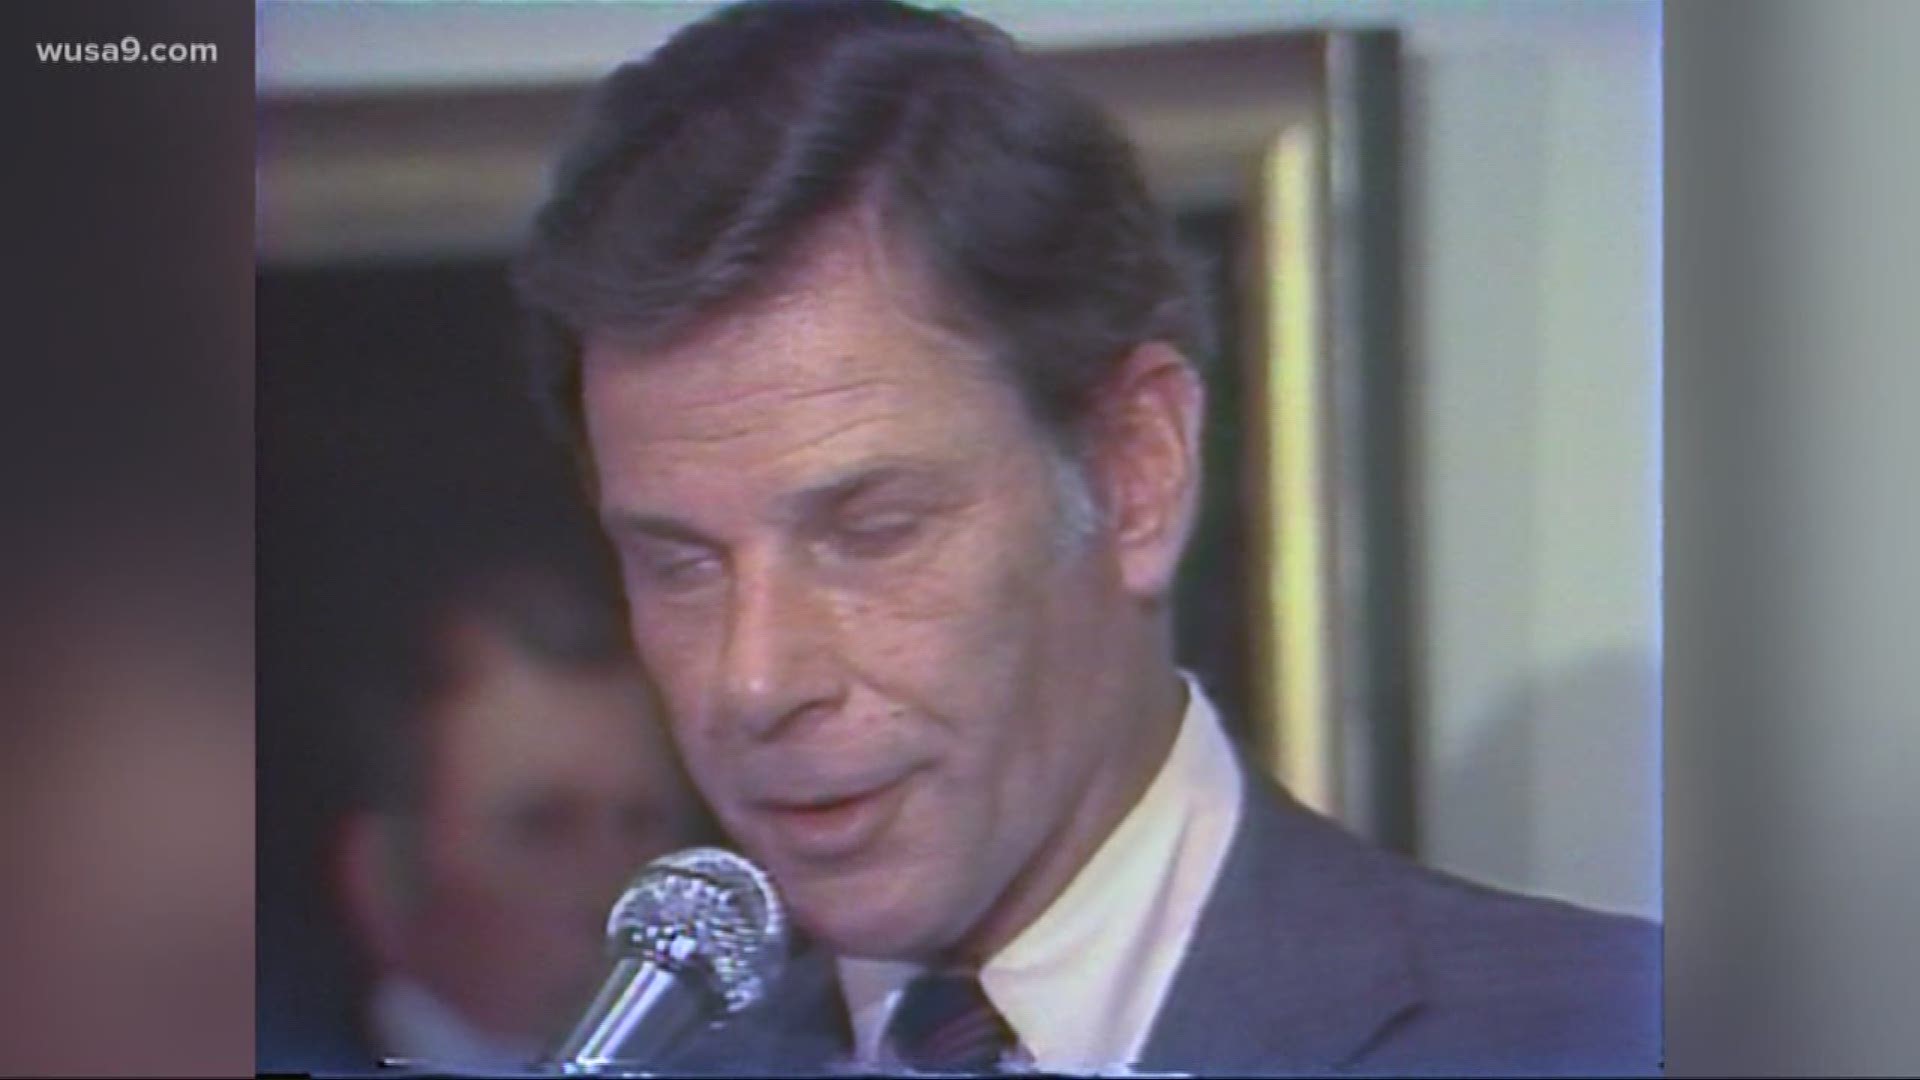 Former governor Harry Hughes has died. Hughes was a Democrat who served two terms as governor from 1979 to 1987.